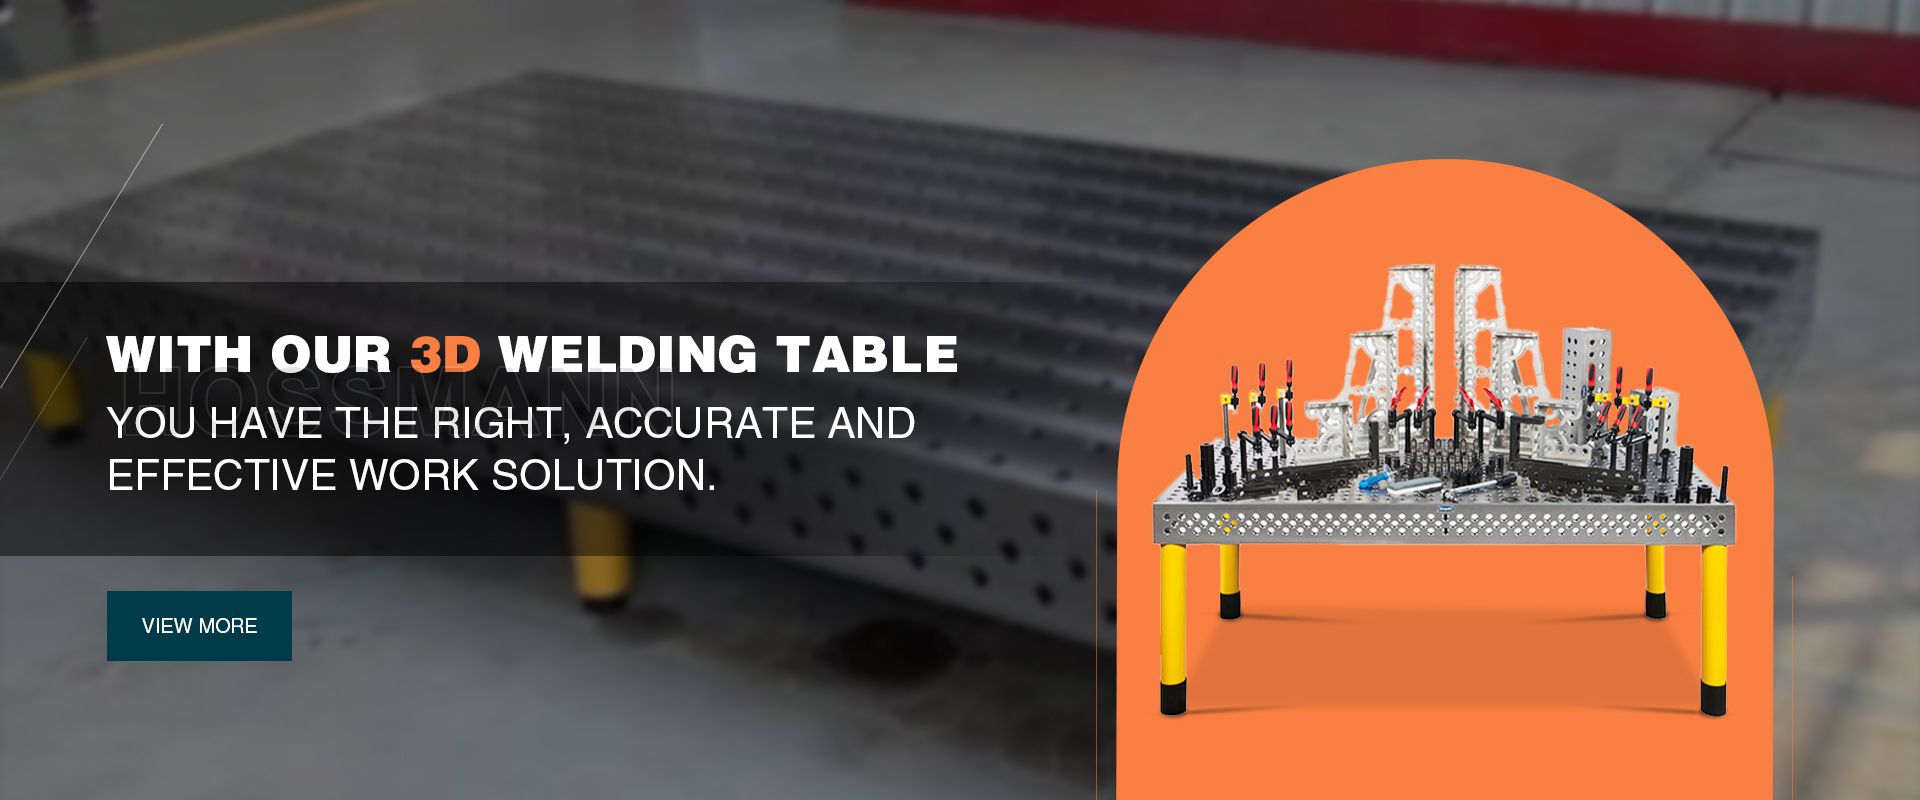 How To Use A Welding Table